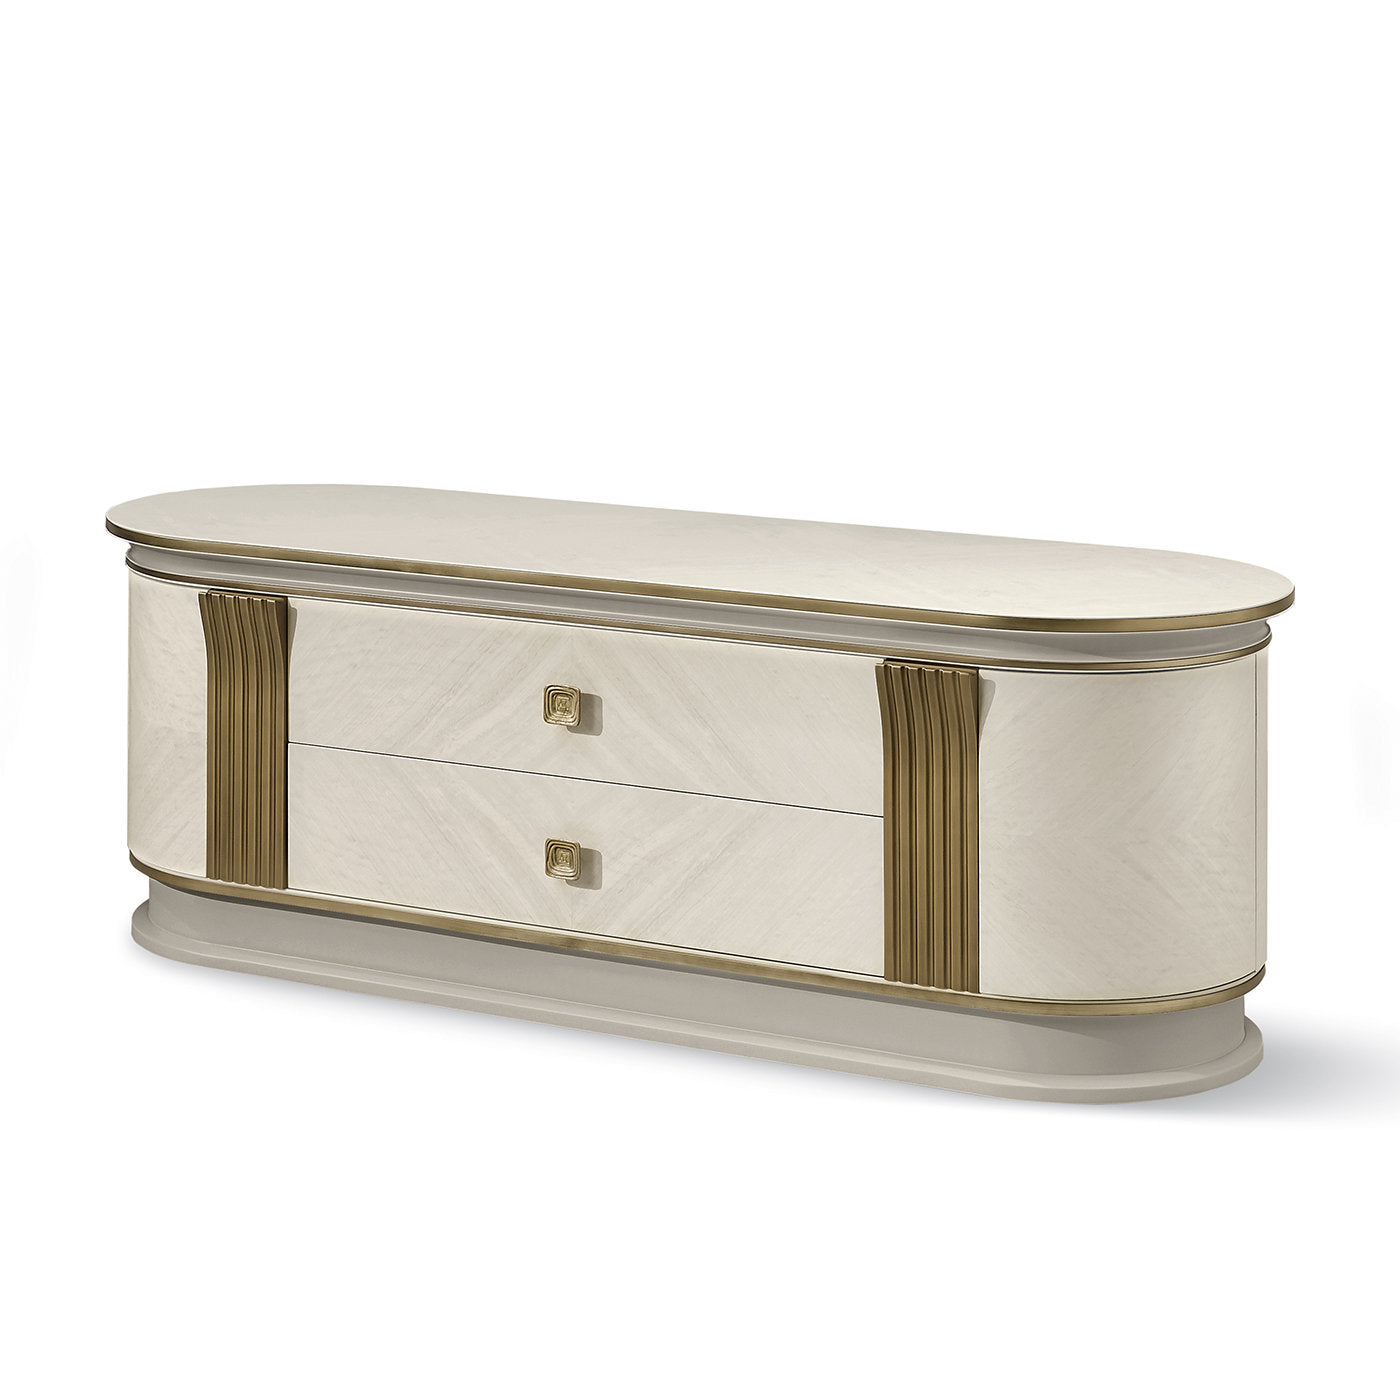 White and Gold Media Sideboard - Alternative view 1